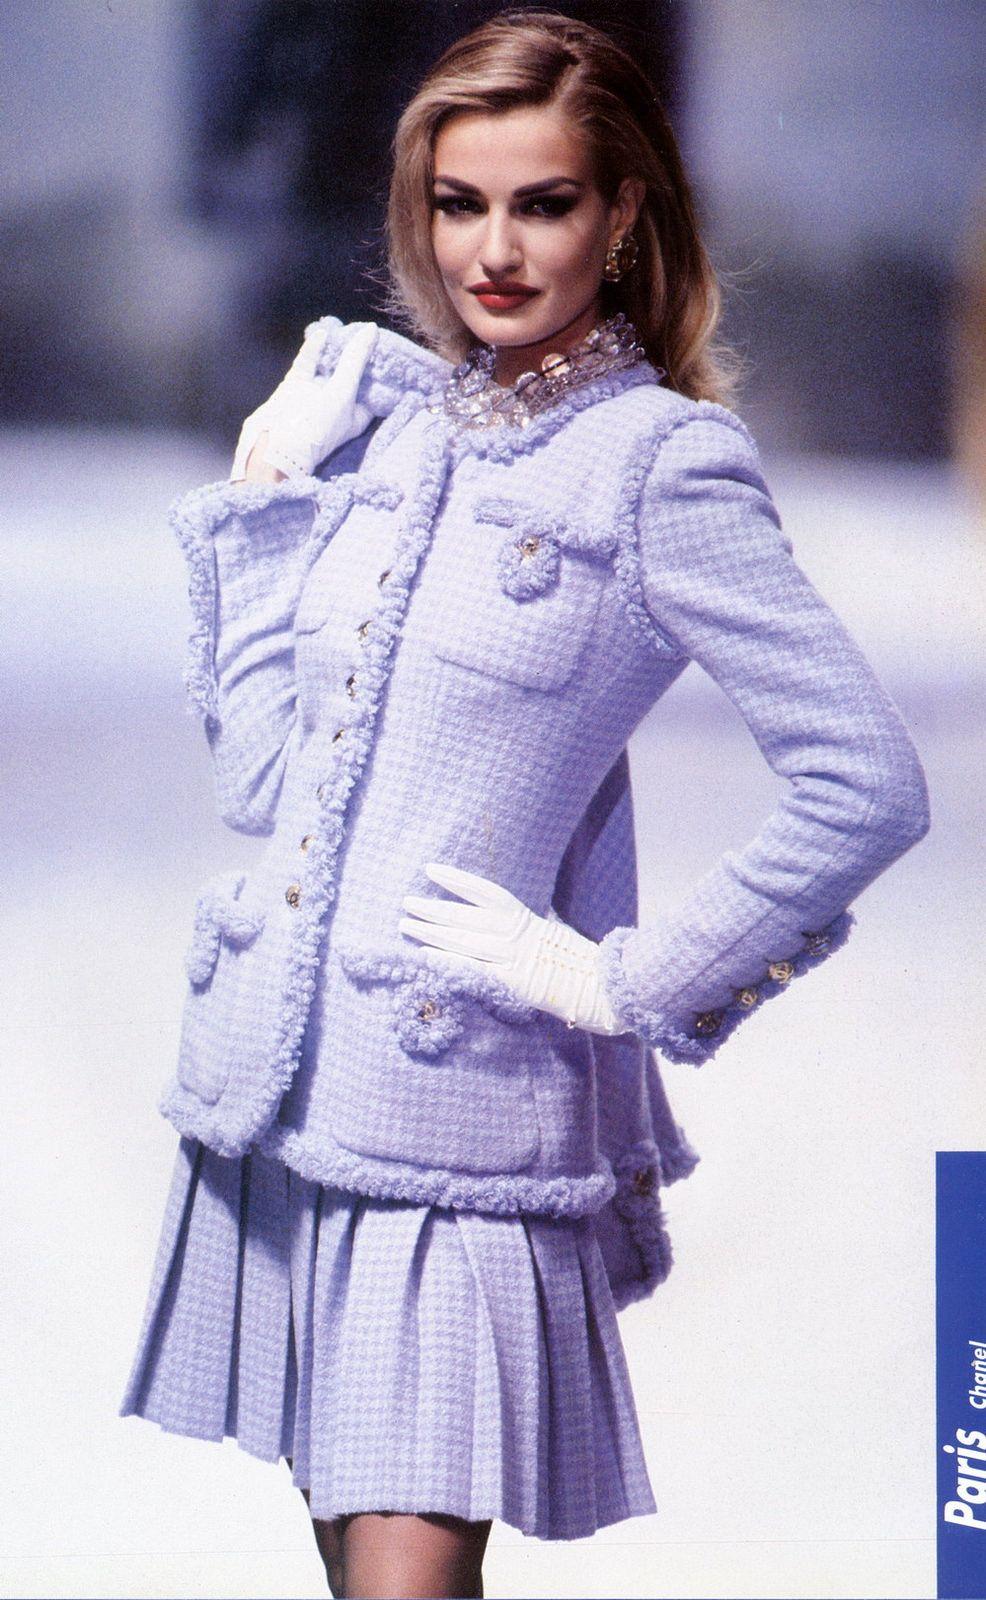 Chanel 1997 Vintage Baby Blue Tweed Jacket Museum Piece Seen on Princess Diana  For Sale 13